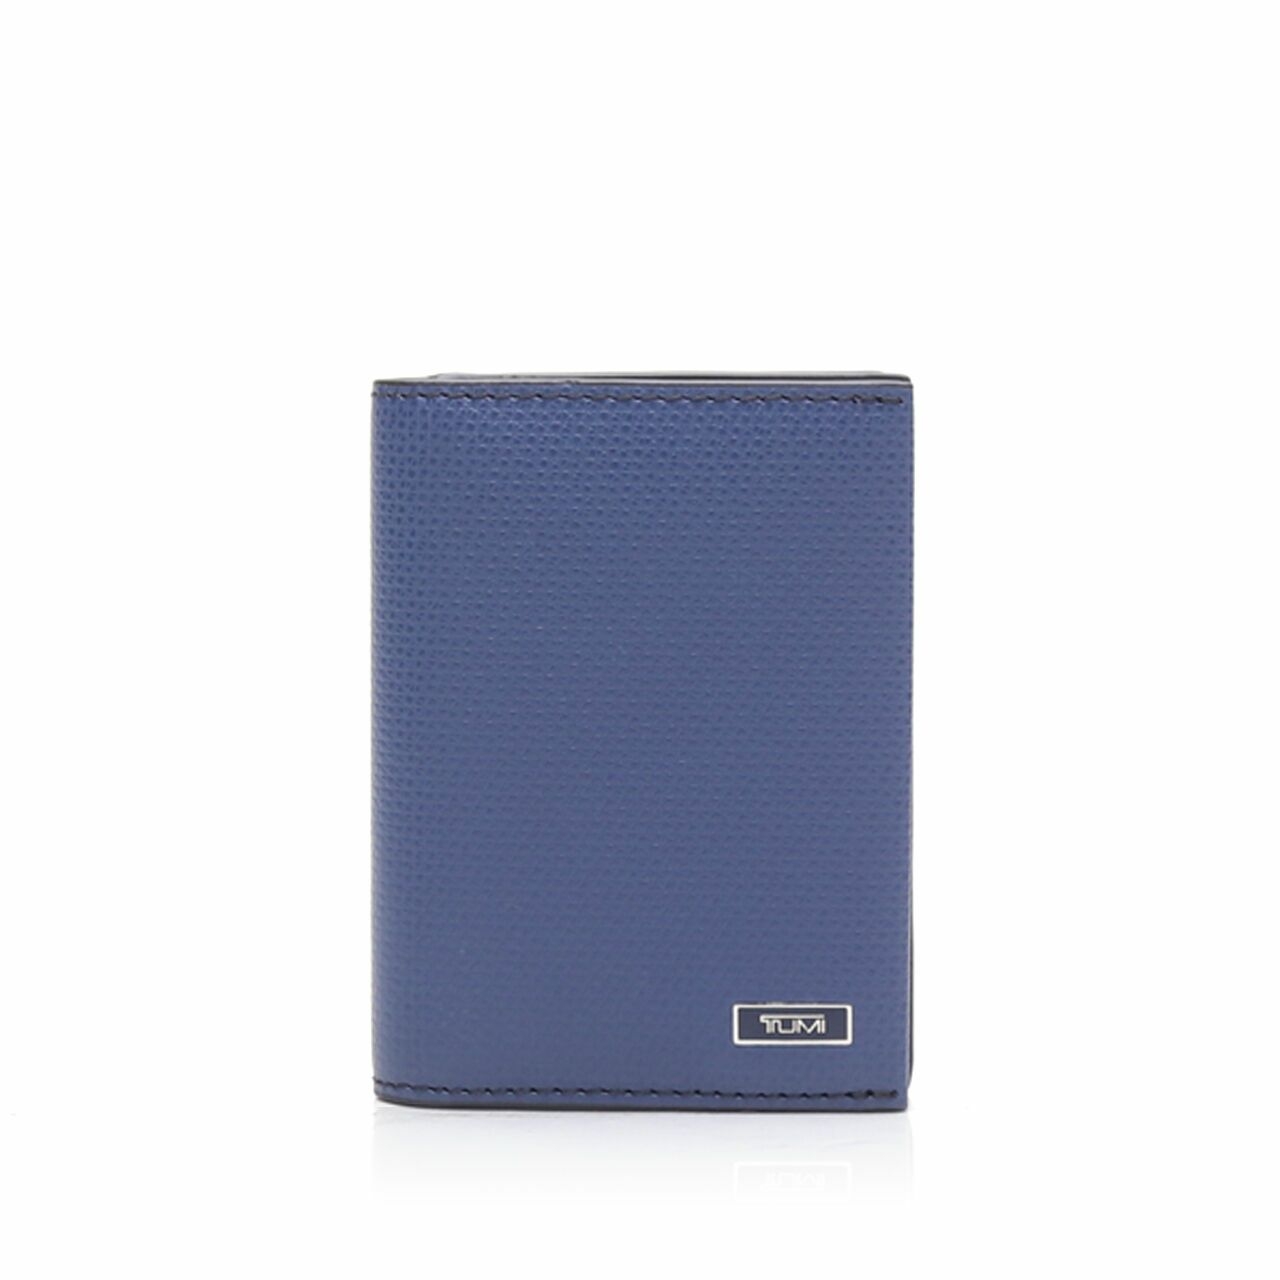 Tumi Gusseted Navy Card Case